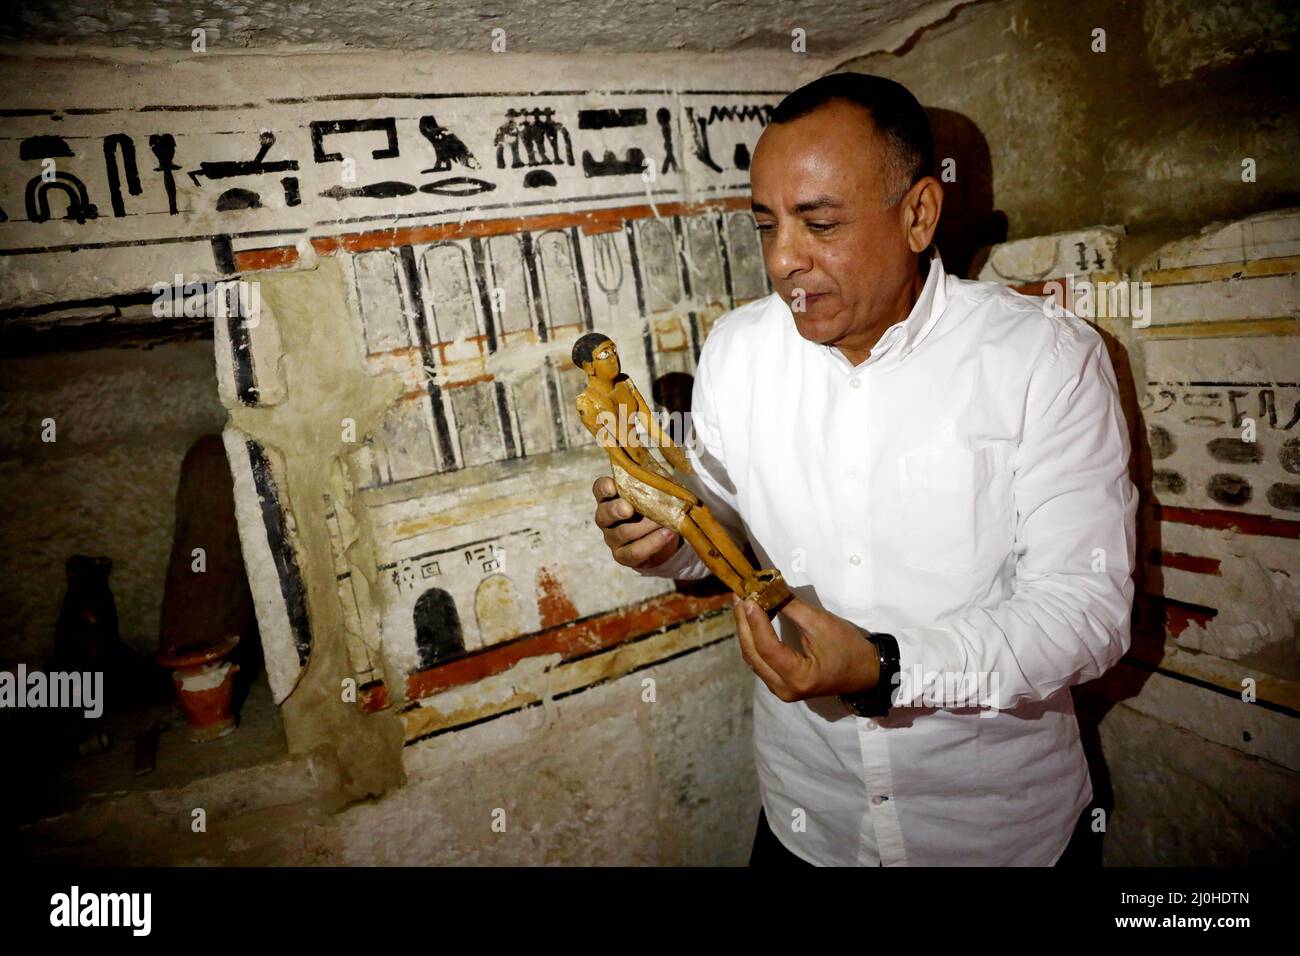 (220319) -- CAIRO, March 19, 2022 (Xinhua) -- An archaeologist shows a statue found in an ancient tomb uncovered at Saqqara archaeological sites southwest of Cairo, Egypt, on March 19, 2022. The Egyptian Ministry of Tourism and Antiquities announced on Thursday the discovery of five 4,000-year-old ancient tombs in the Saqqara archaeological sites southwest of Cairo. The tombs contain finds and objects dating back to the end of the Old Kingdom spanning from 2686 BC to 2181 BC and the beginning of the First Intermediate Period spanning from 2181 BC to 2055 BC. TO GO WITH 'Egypt discovers fi Stock Photo